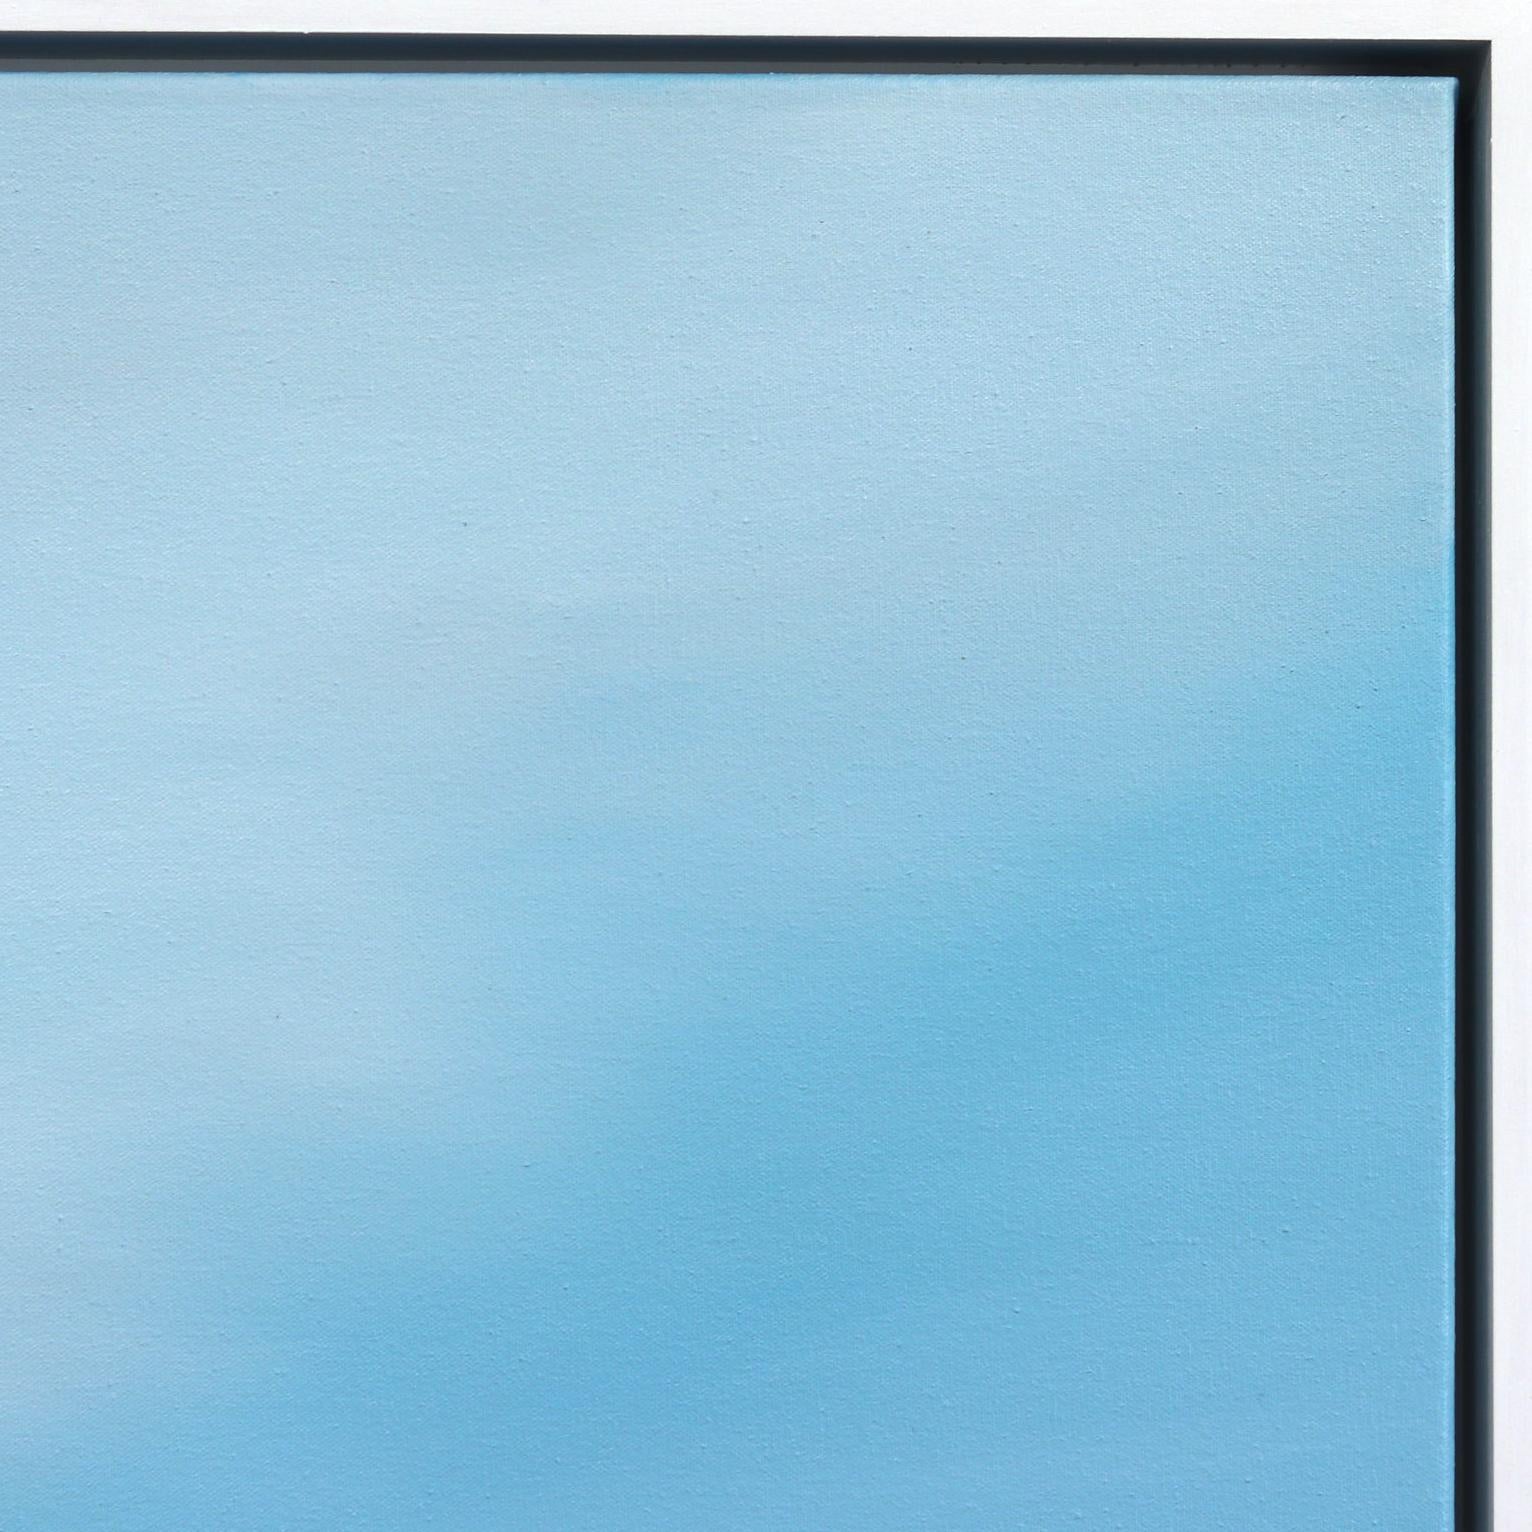 Untitled No. 756 - Framed Contemporary Minimalist Blue Artwork For Sale 4